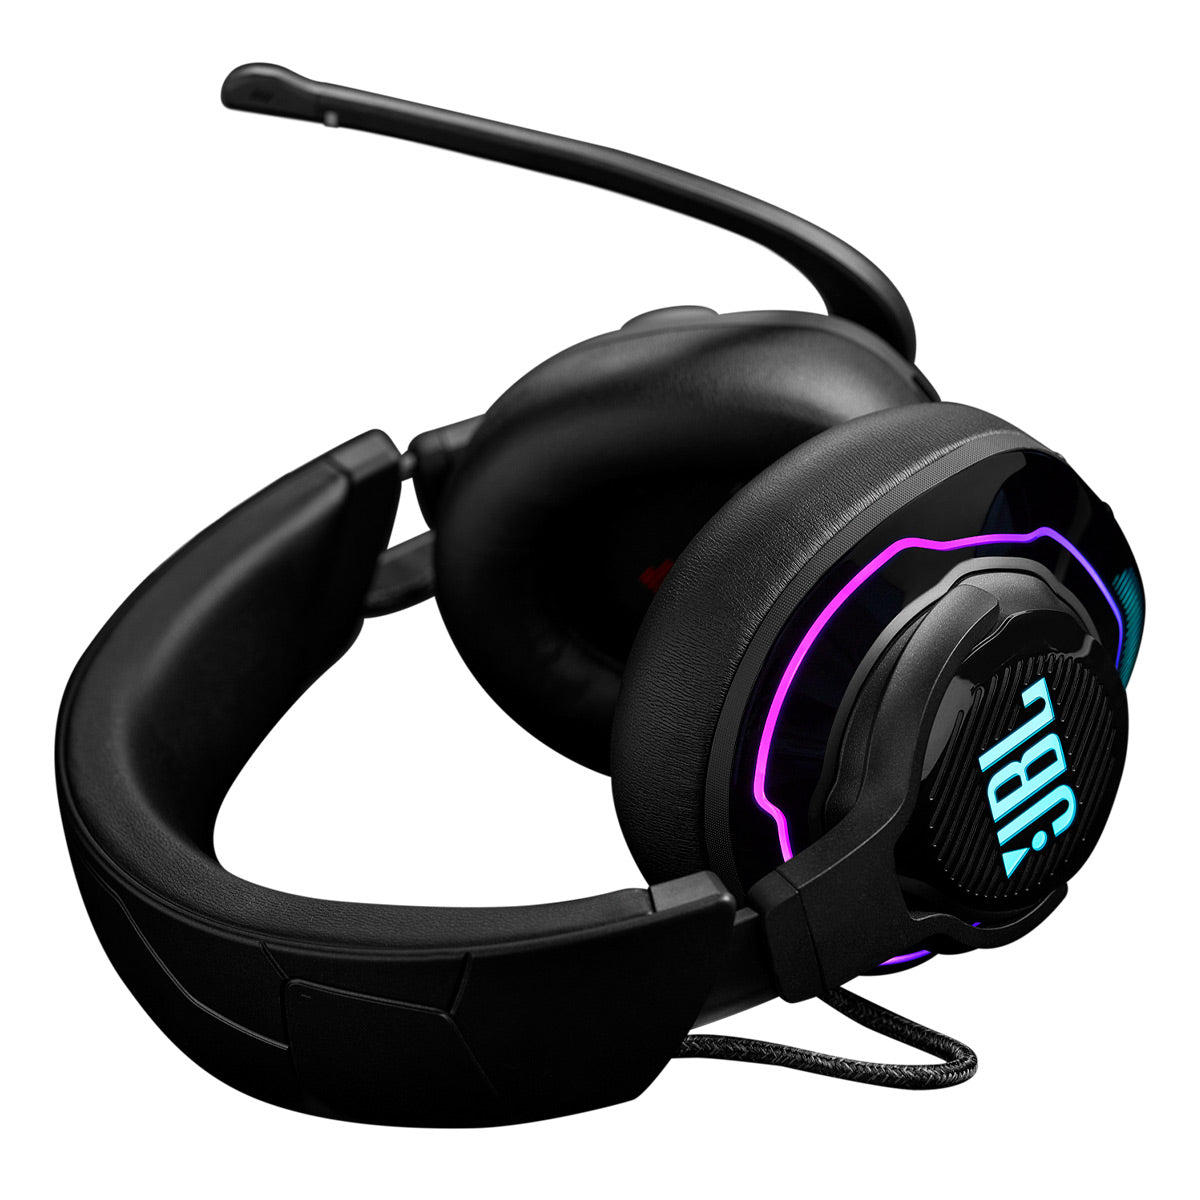 JBL Quantum 910 Wireless Over-Ear Gaming Headphones with Active Noise Cancelling, Bluetooth, & Head Tracking (Black)